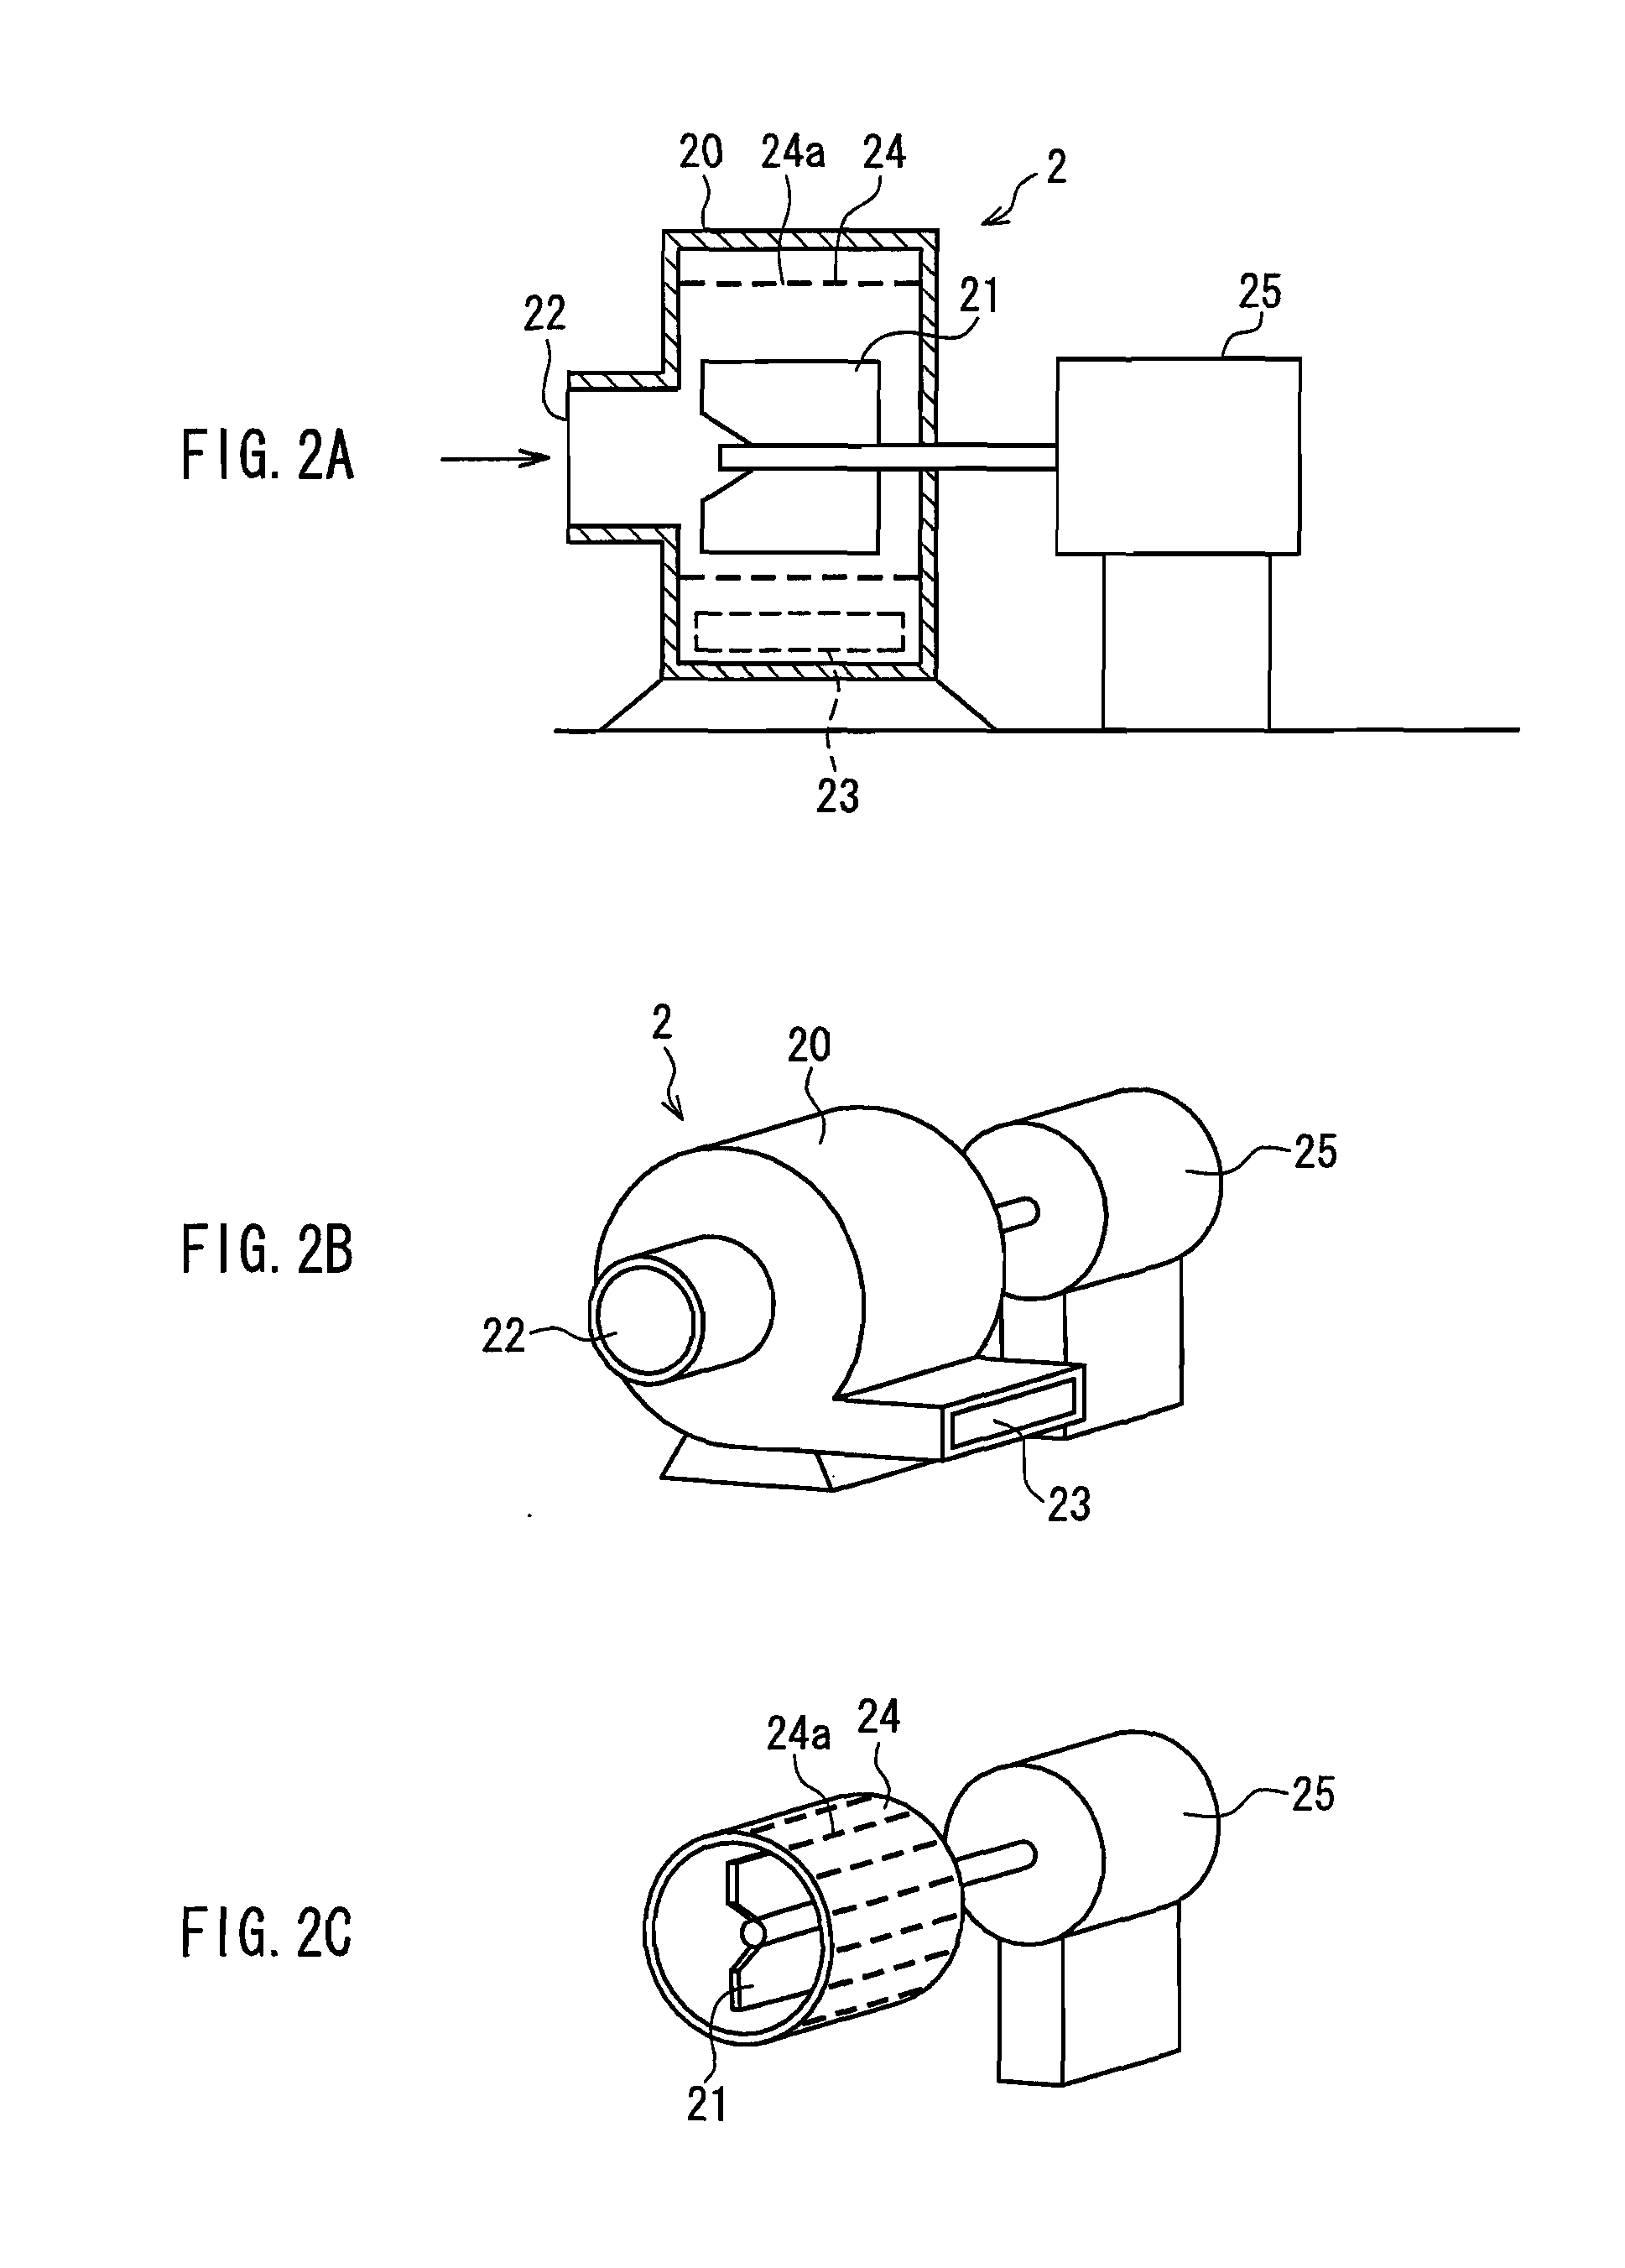 Pulverized material producing system